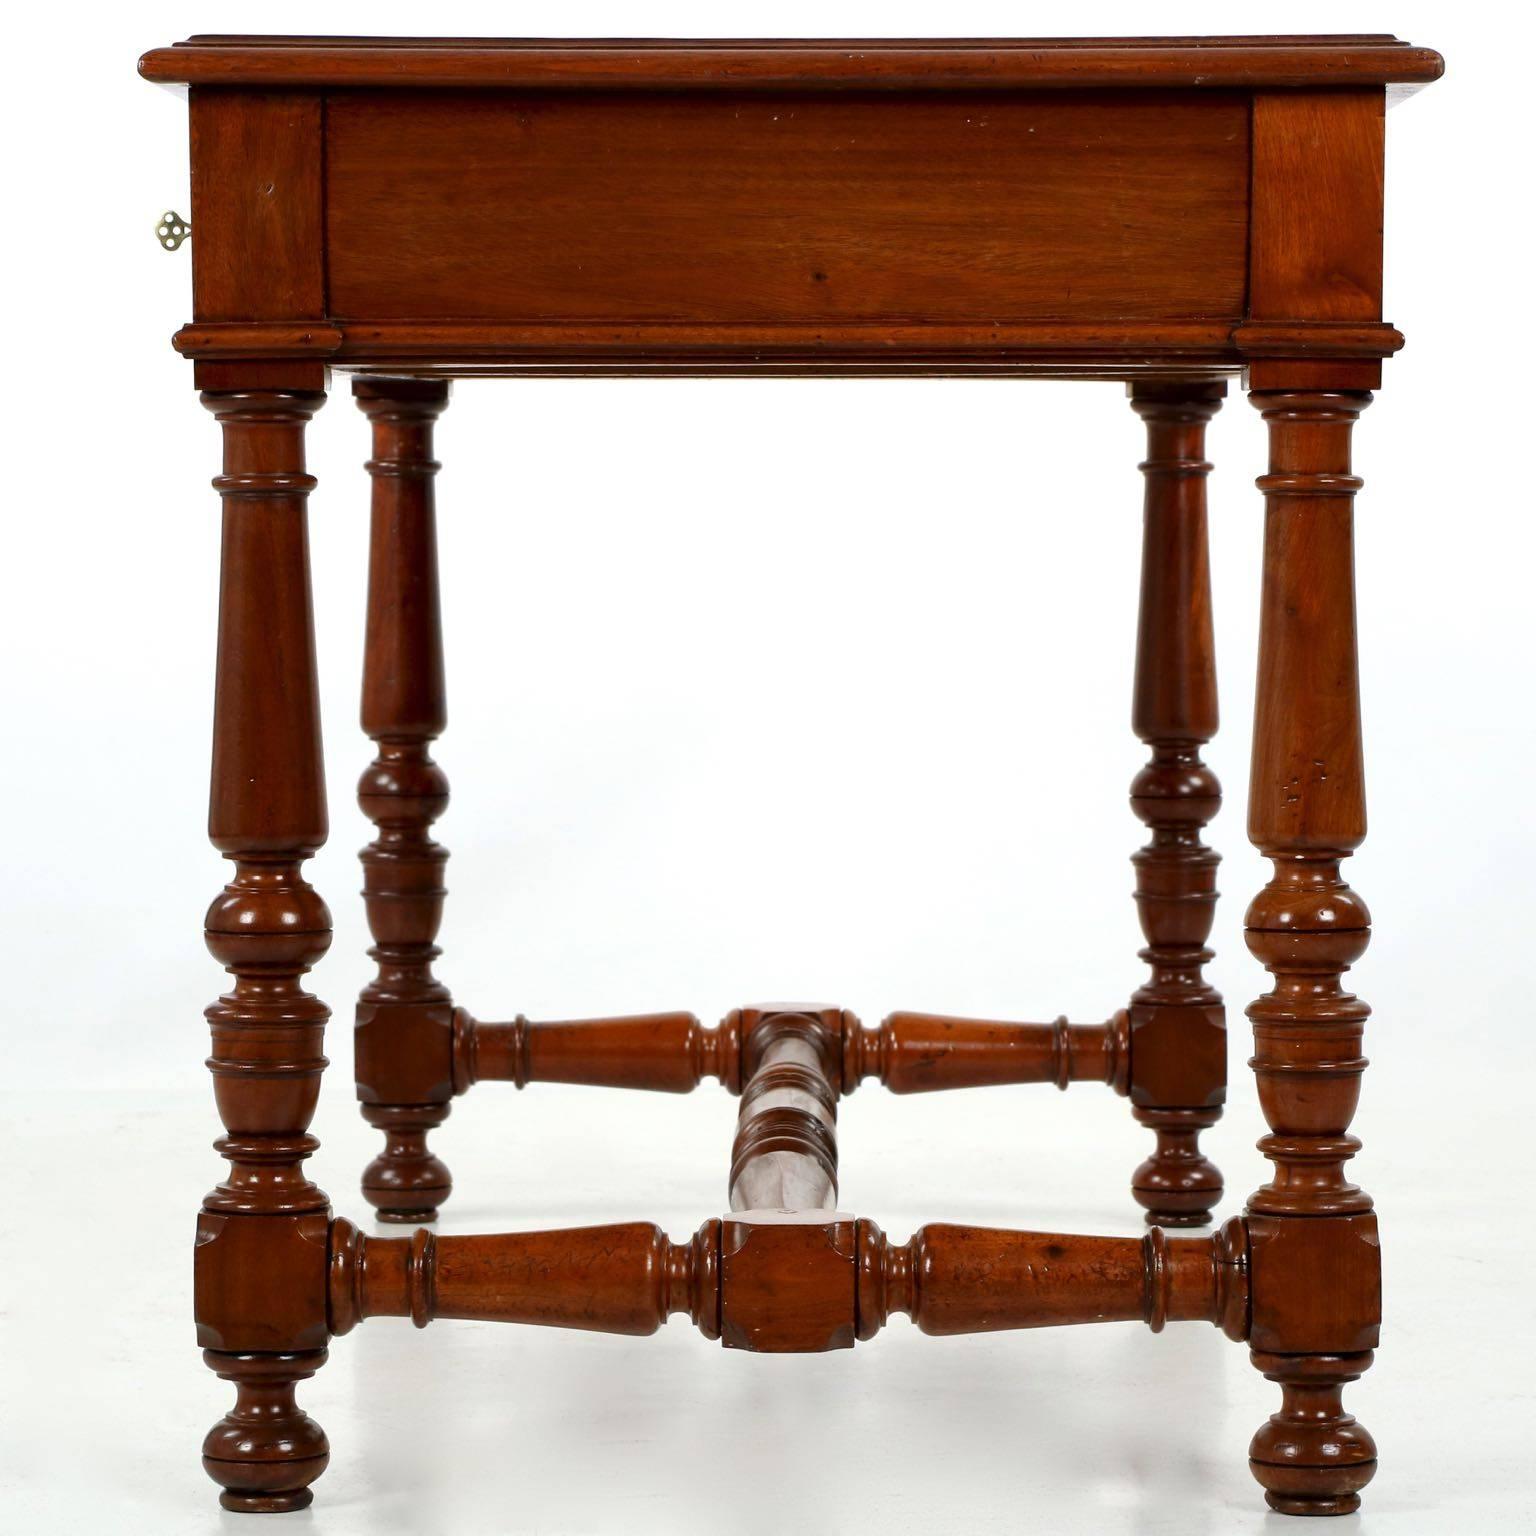 Early 20th Century English William and Mary Style Antique Writing Desk W/ Leather Top, circa 1900